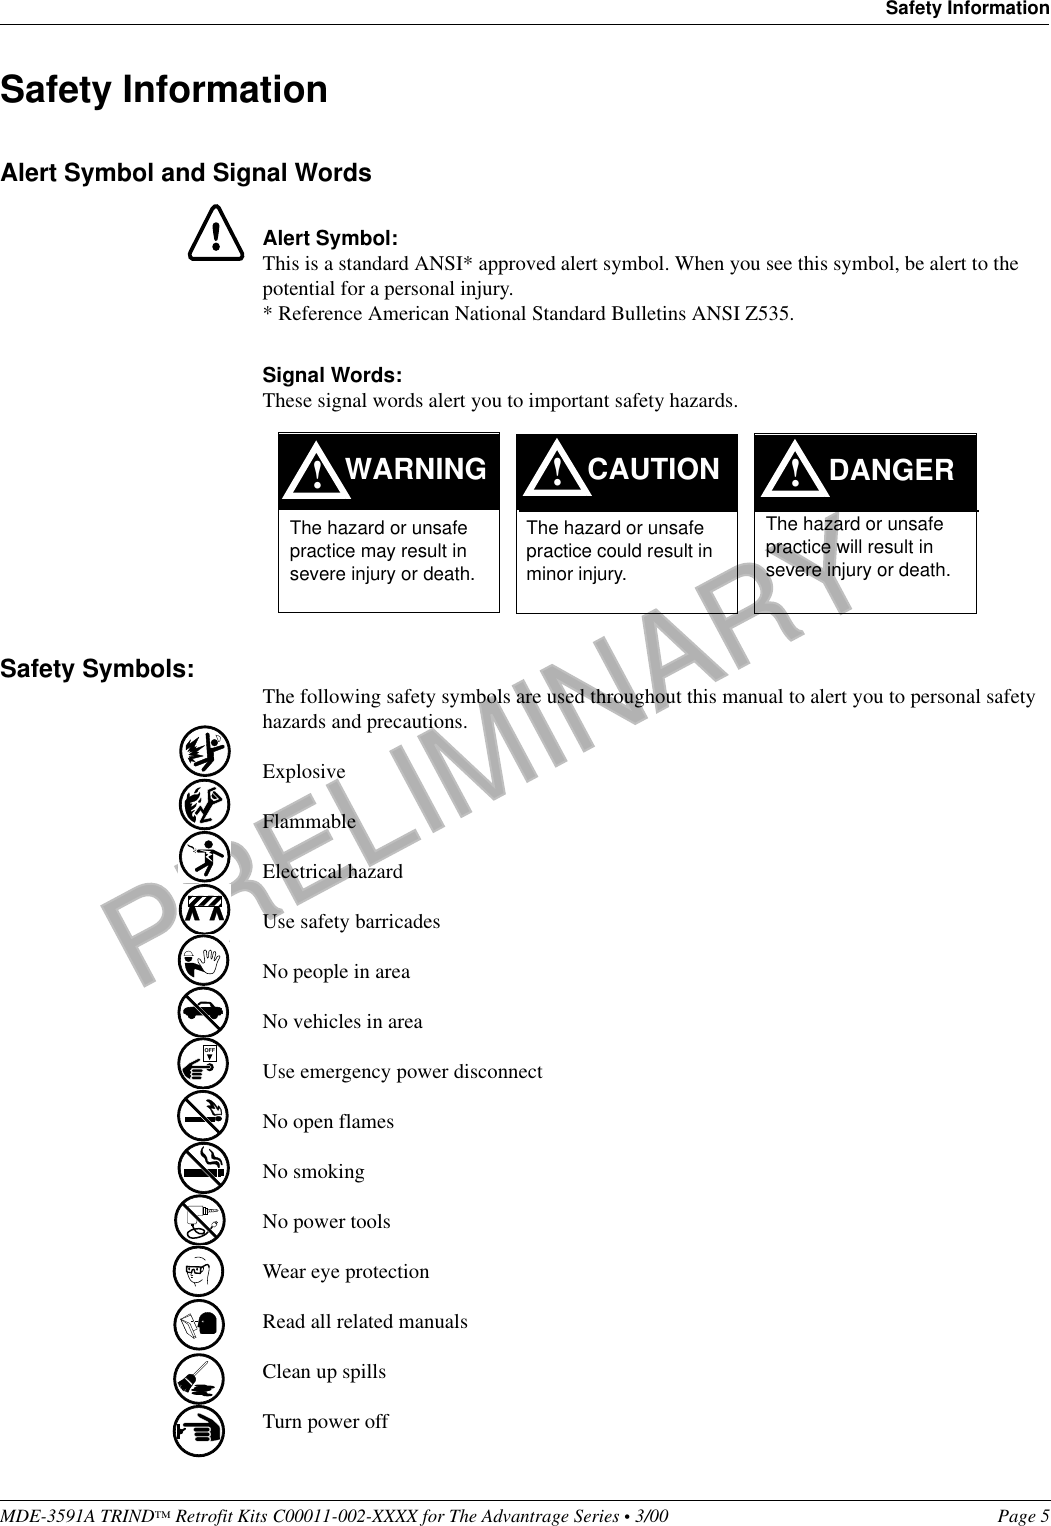 PRELIMINARYMDE-3591A TRIND™ Retrofit Kits C00011-002-XXXX for The Advantrage Series • 3/00  Page 5Safety InformationSafety InformationAlert Symbol and Signal WordsAlert Symbol:This is a standard ANSI* approved alert symbol. When you see this symbol, be alert to the potential for a personal injury.* Reference American National Standard Bulletins ANSI Z535.Signal Words:These signal words alert you to important safety hazards.Safety Symbols: The following safety symbols are used throughout this manual to alert you to personal safety hazards and precautions.ExplosiveFlammableElectrical hazardUse safety barricadesNo people in areaNo vehicles in areaUse emergency power disconnectNo open flamesNo smokingNo power toolsWear eye protectionRead all related manualsClean up spillsTurn power off!WARNINGThe hazard or unsafe practice may result in severe injury or death. !CAUTIONThe hazard or unsafe practice could result in minor injury. The hazard or unsafe practice will result in severe injury or death.!DANGEROFF